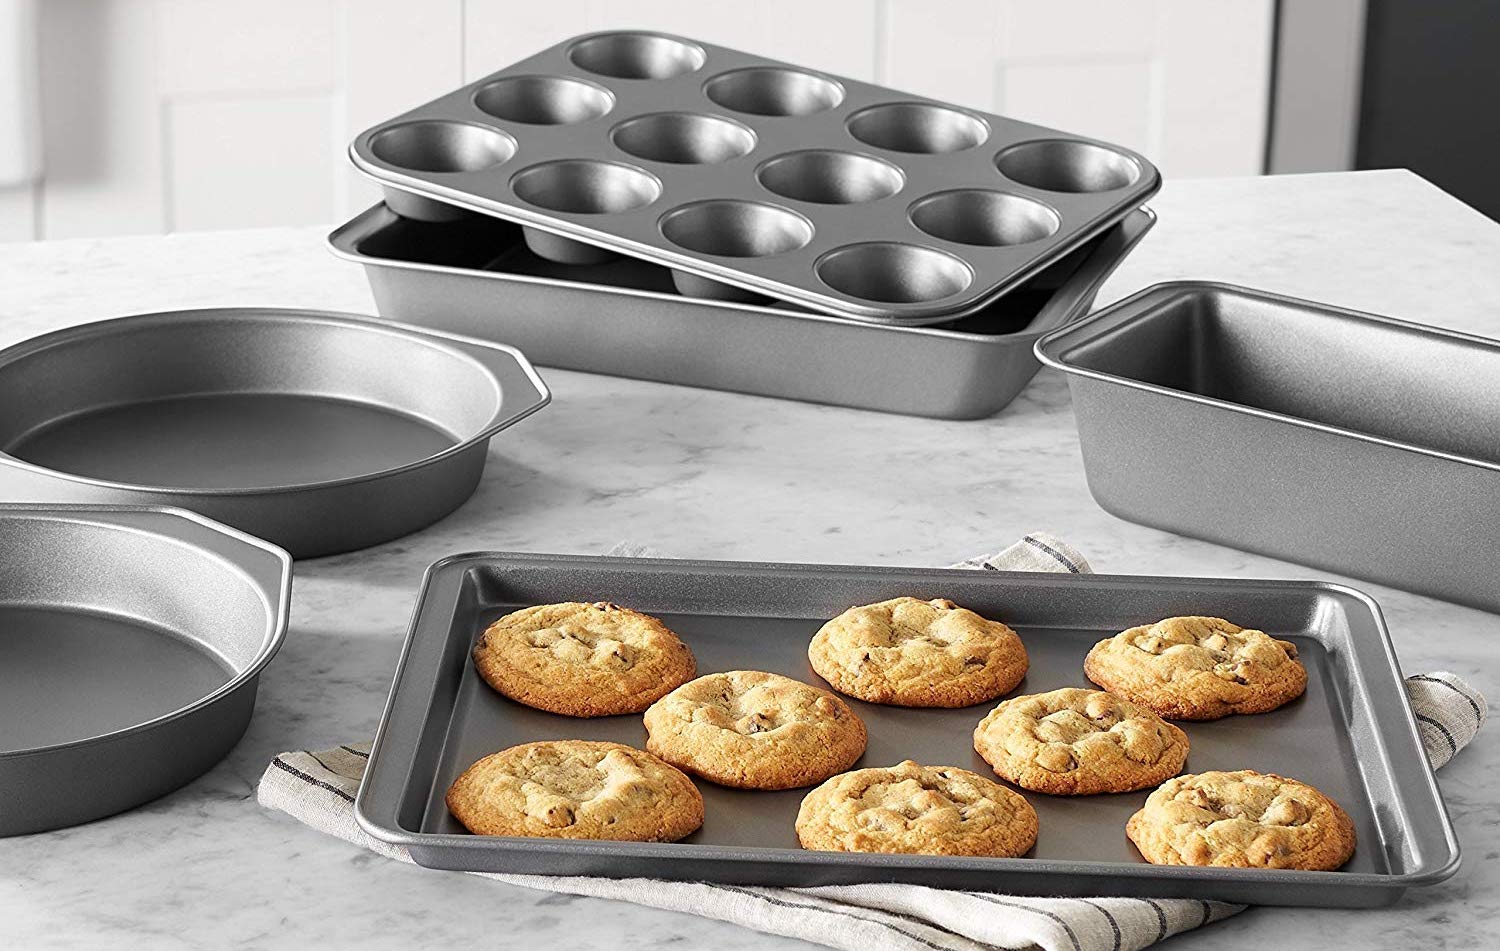 Top 10 Best Bakeware Sets in 2022 | Baking Pans - Reviews & Guide